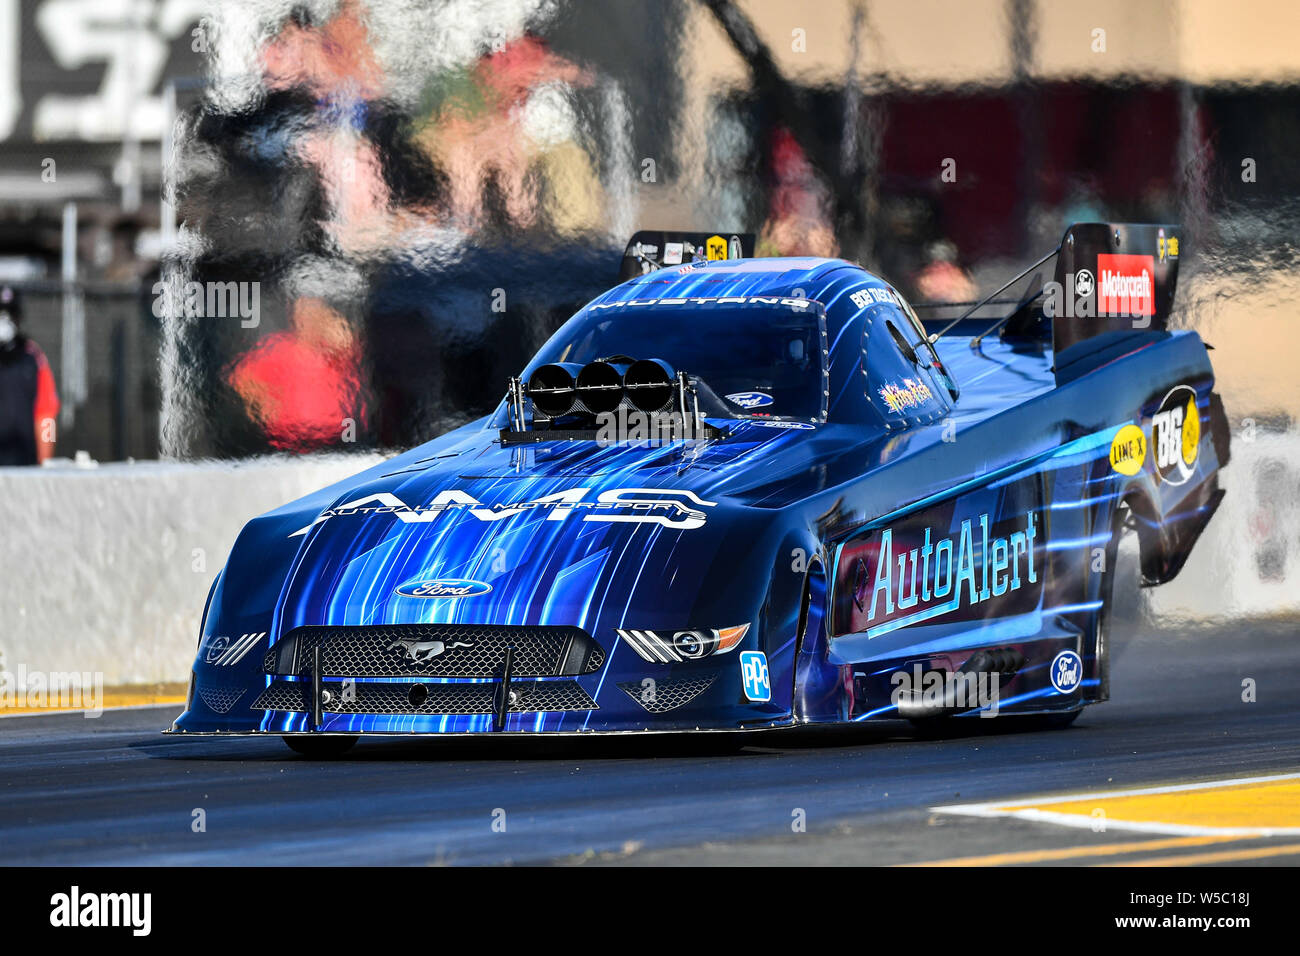 Sonoma, California, USA. 27th July, 2019. Robert Tasca in action during the NHRA Sonoma Nationals at Sonoma Raceway in Sonoma, California. Chris Brown/CSM/Alamy Live News Stock Photo